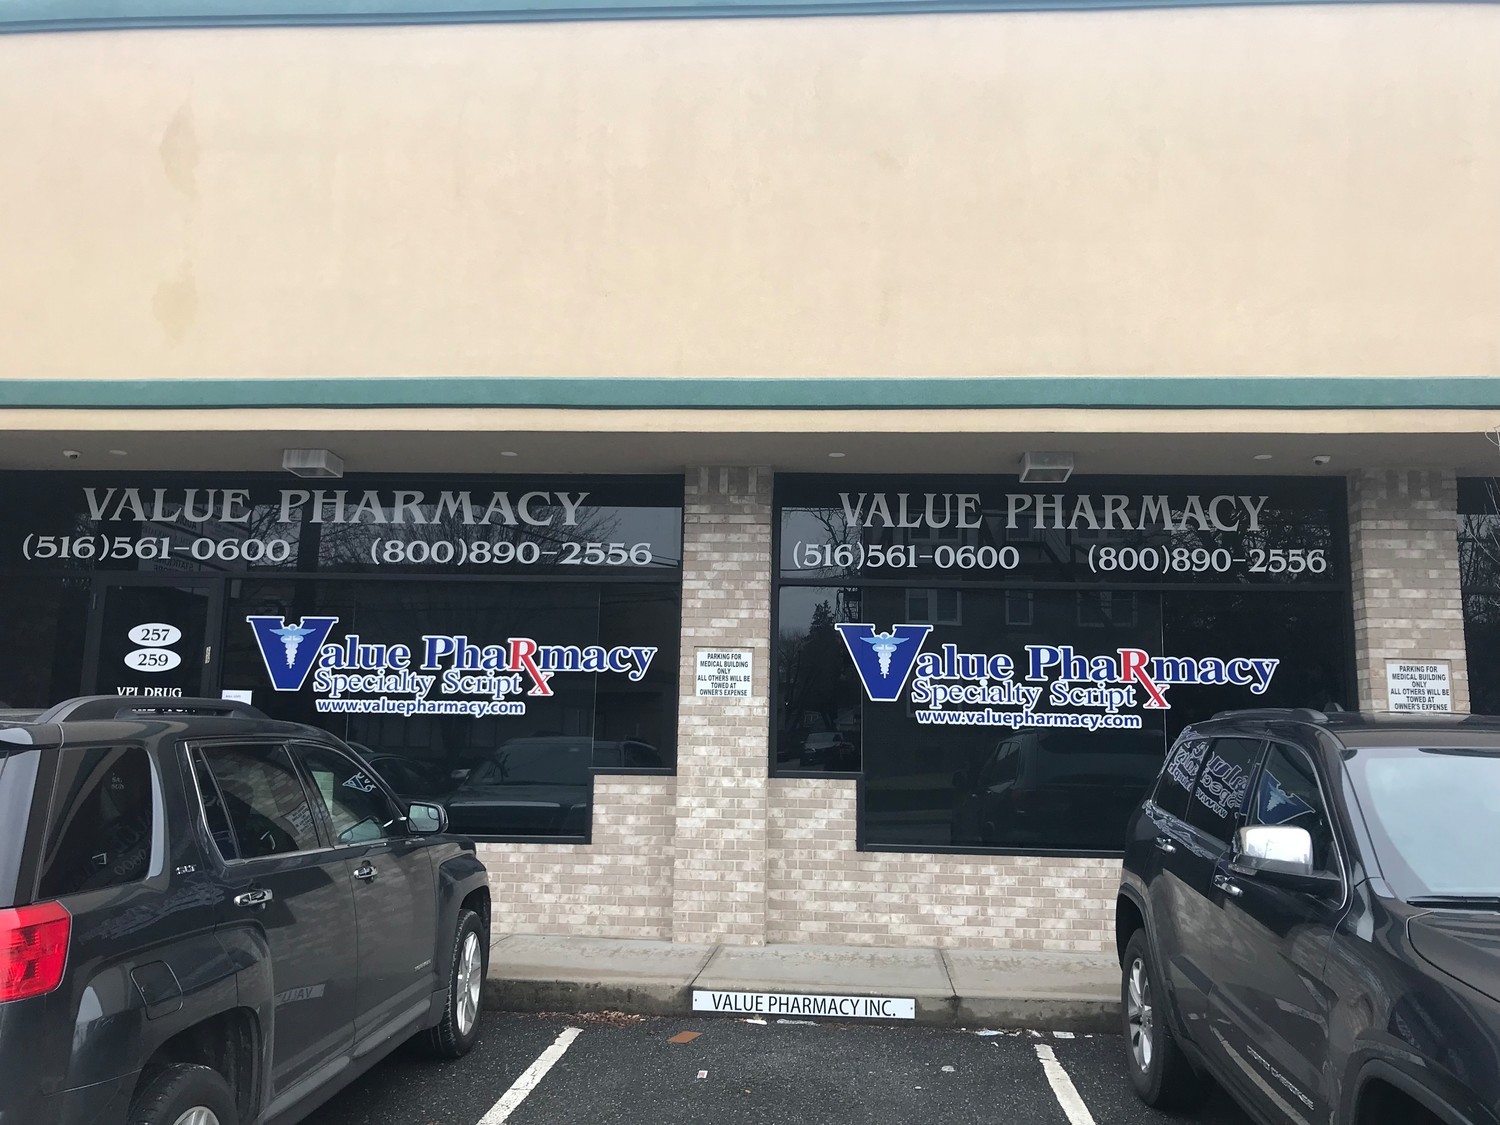 The co-owner of Value Pharmacy in Lynbrook pleaded guilty to defrauding Medicaid out of $1.5 million.